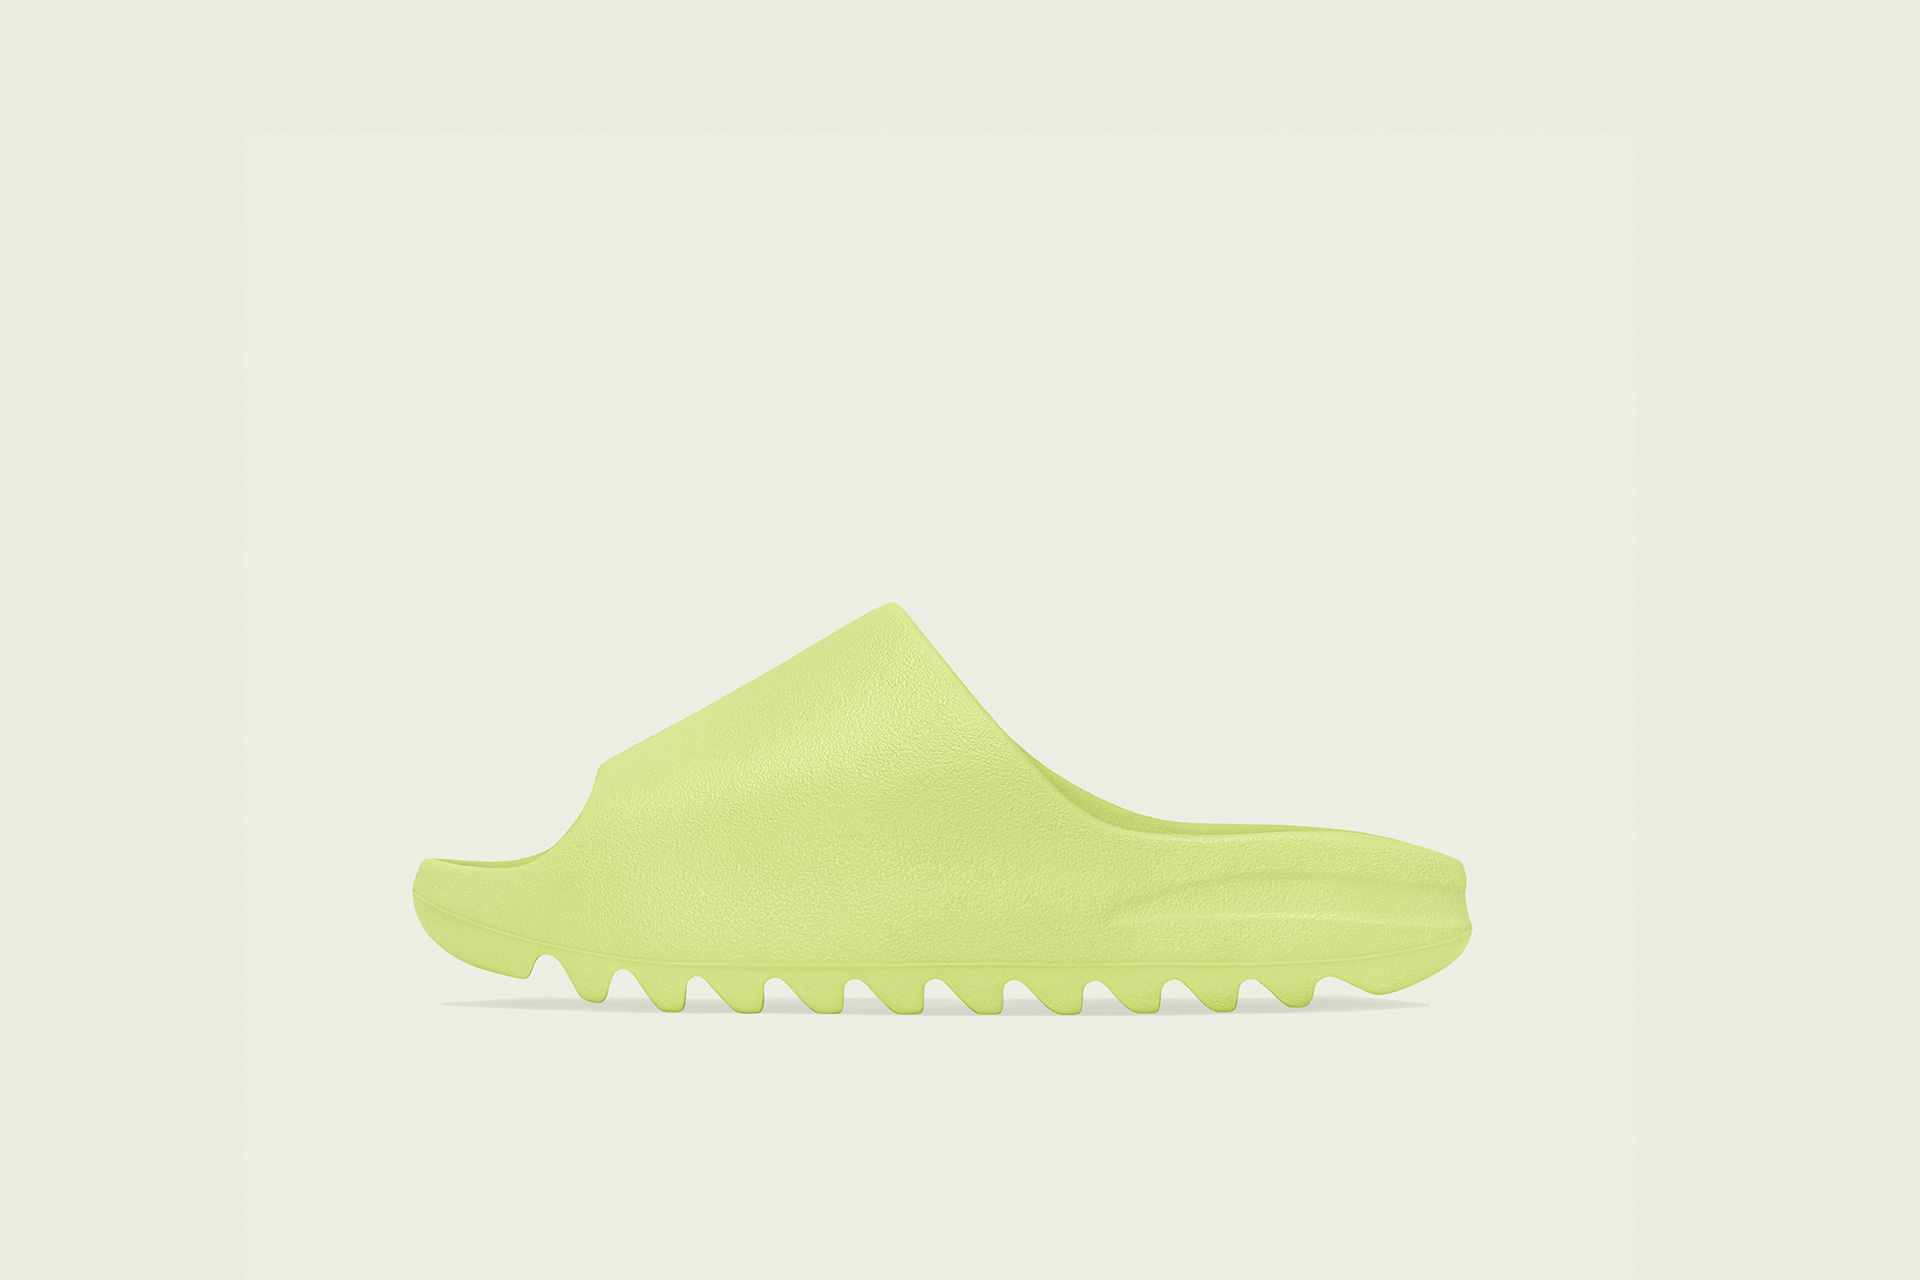 Lab stout Rug adidas Yeezy Slide - HQ6447 - Green Glow - Footshop - Releases